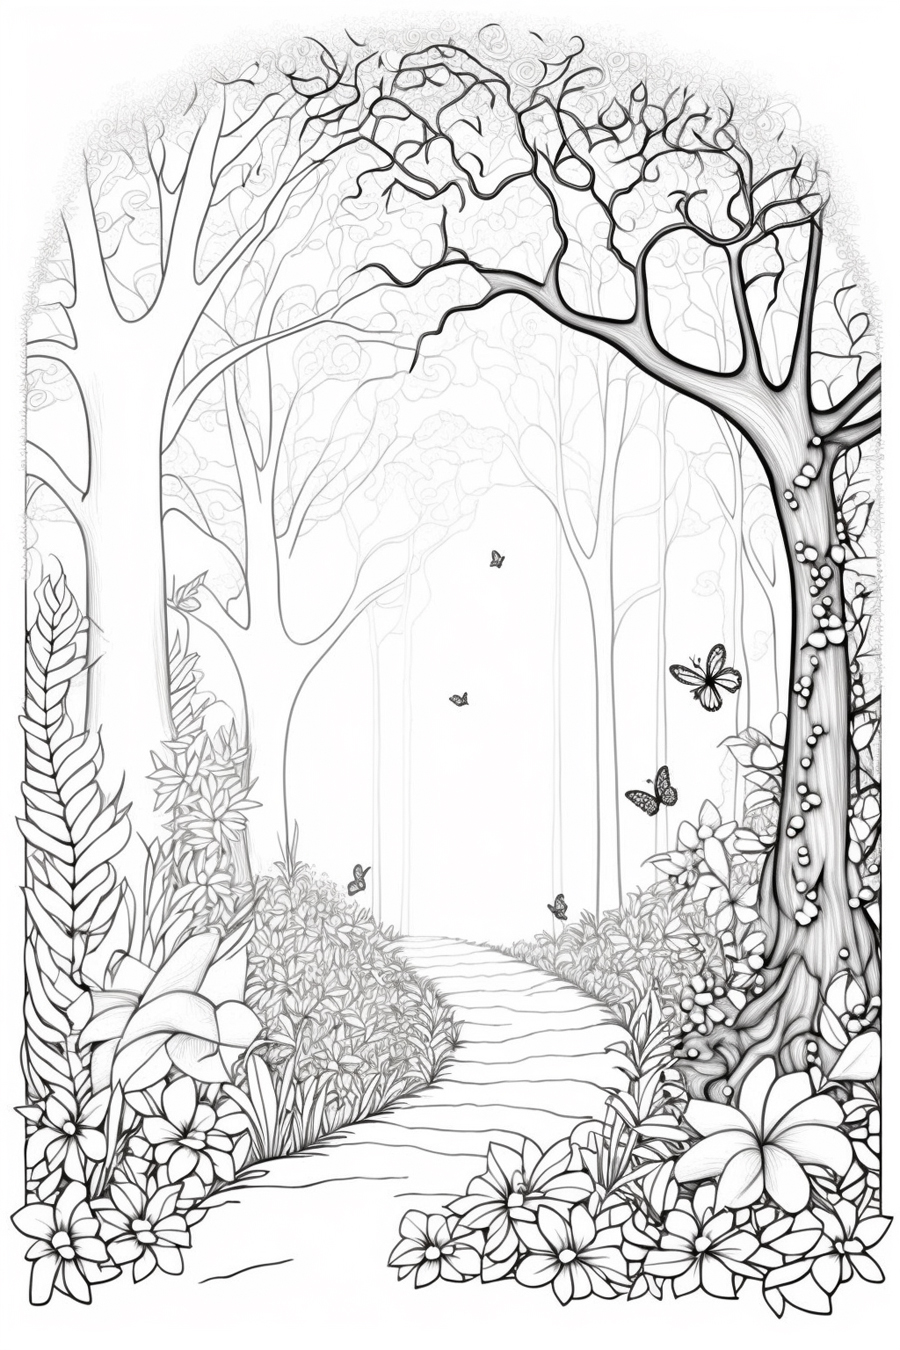 A black and white drawing of a path in the forest.